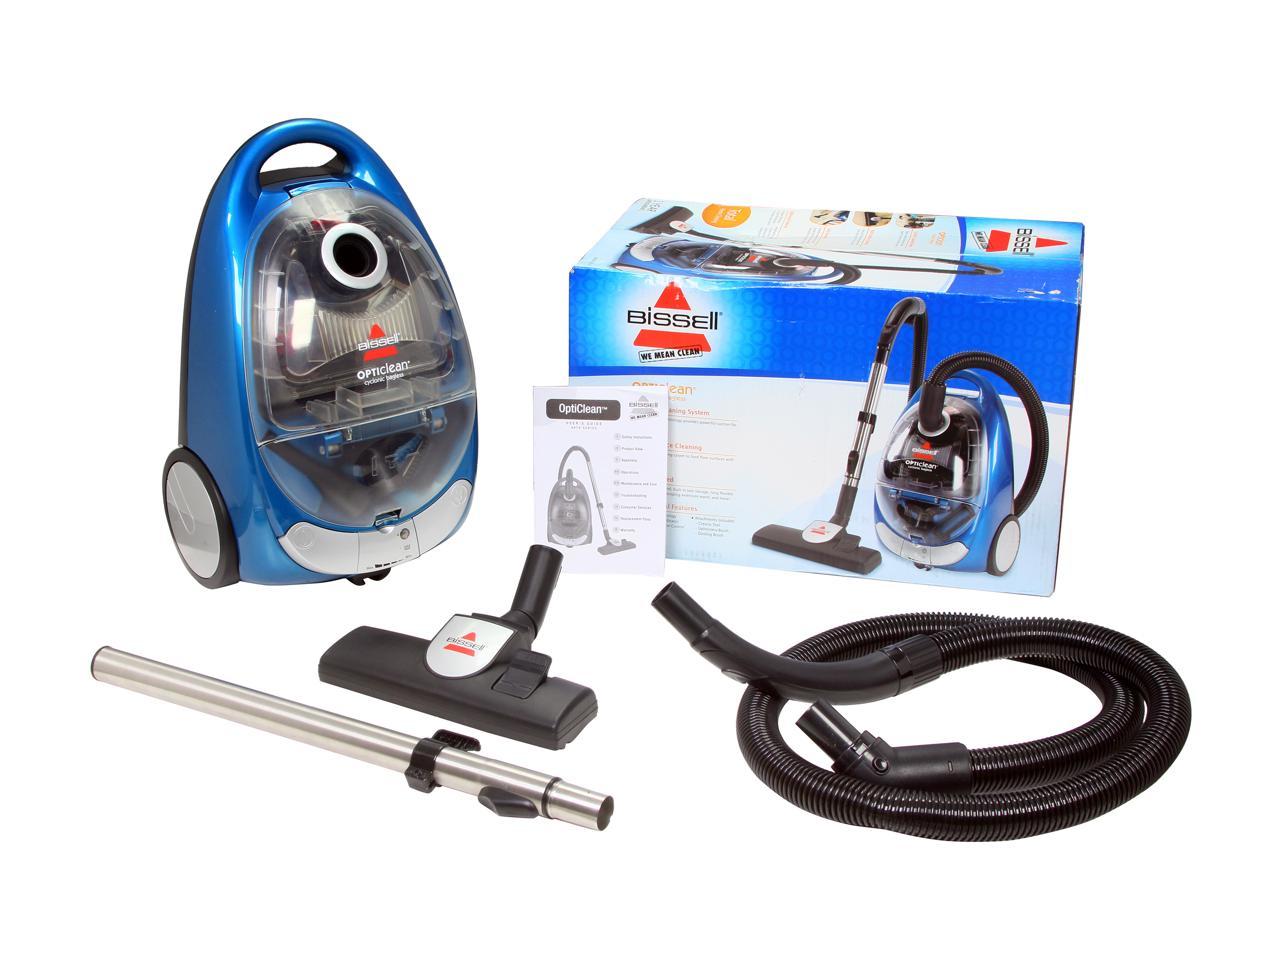 model 66T6 Details about   BISSELL CANISTER VACUUM  OPTI CLEAN CYCLONIC MOTOR 2037317